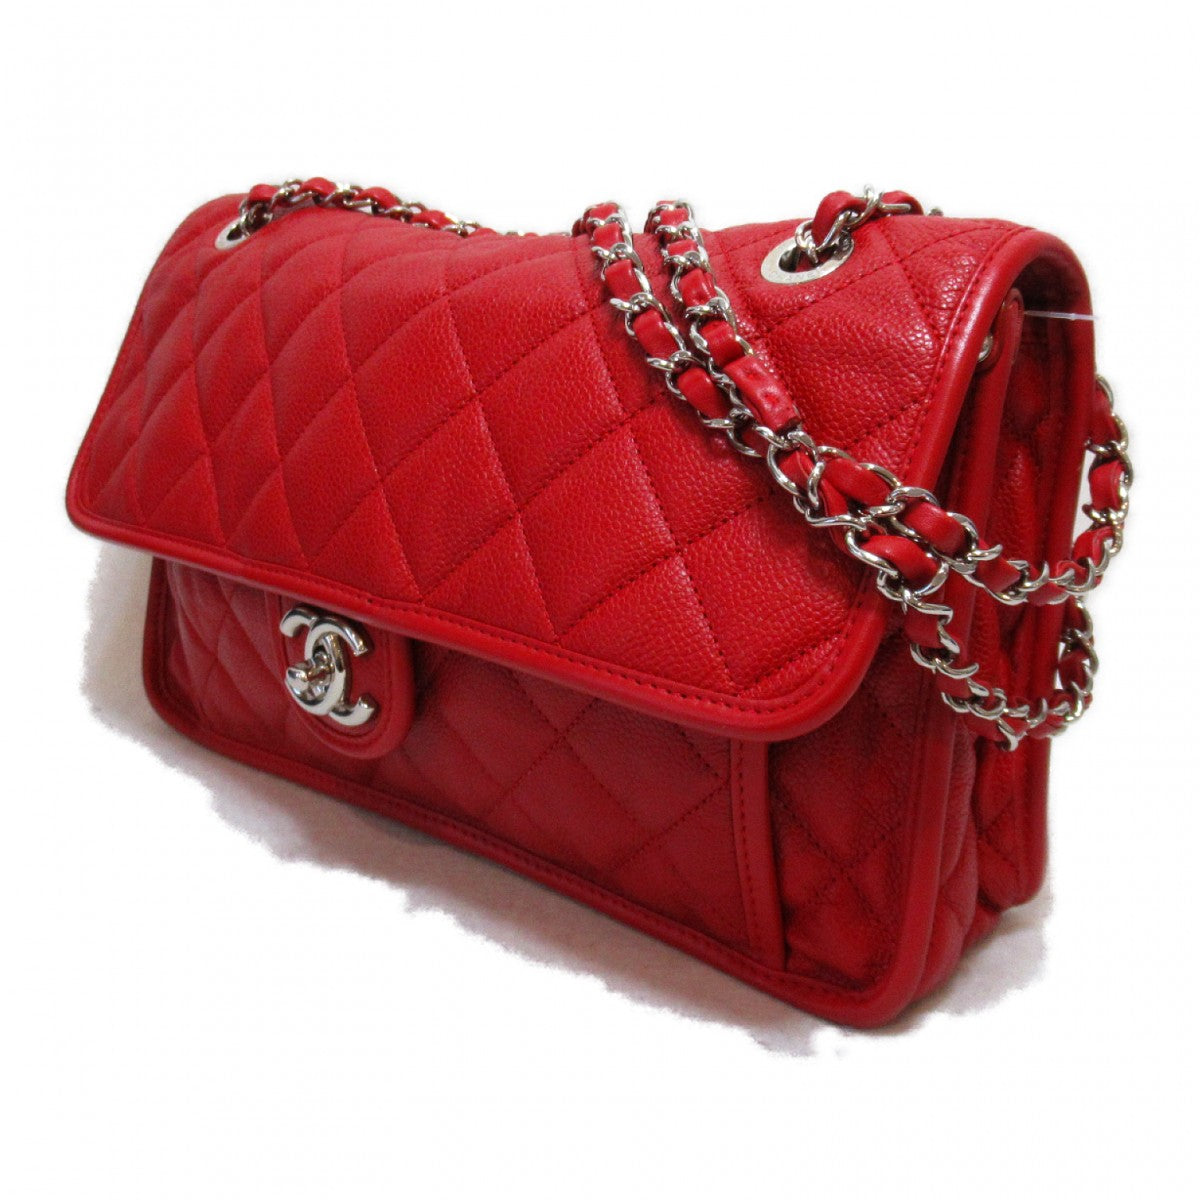 CC Quilted Caviar French Riviera Flap Bag